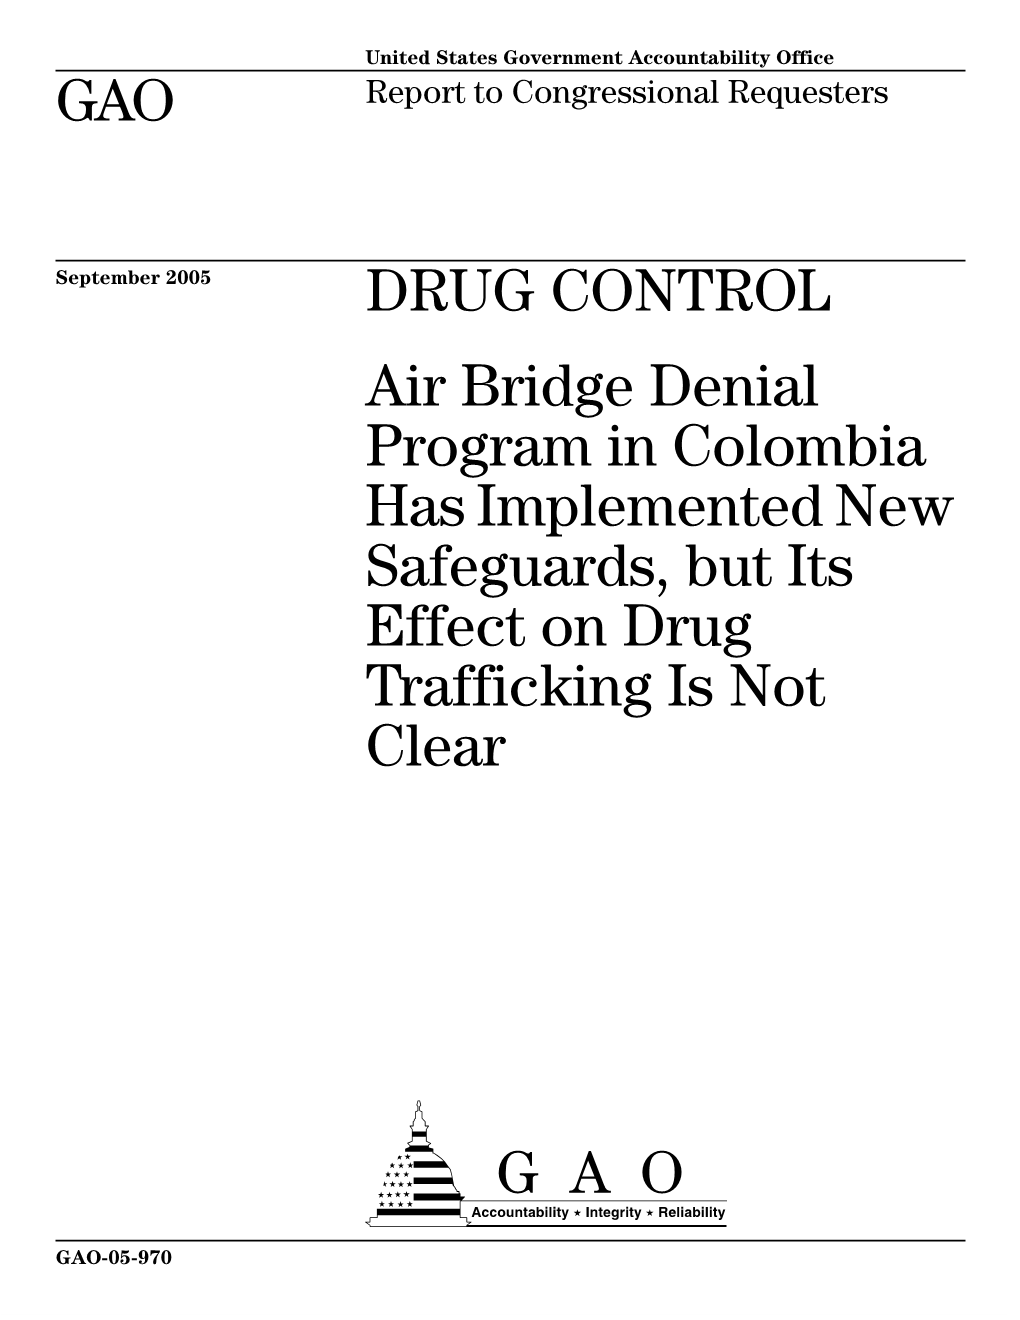 Air Bridge Denial Program in Colombia Has Implemented New Safeguards, but Its Effect on Drug Trafficking Is Not Clear